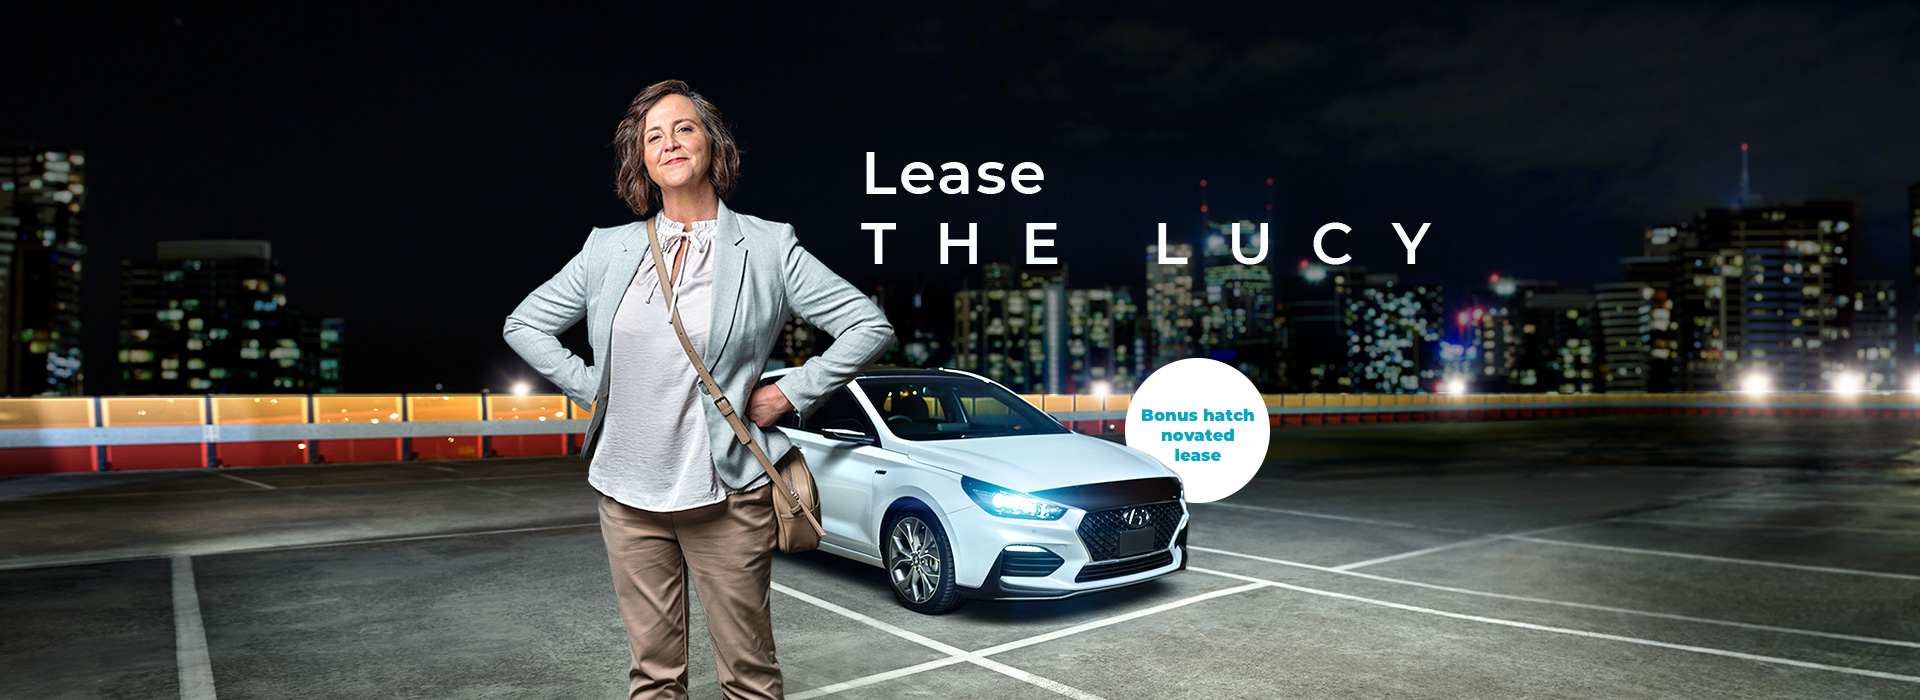 Lease the Lucy